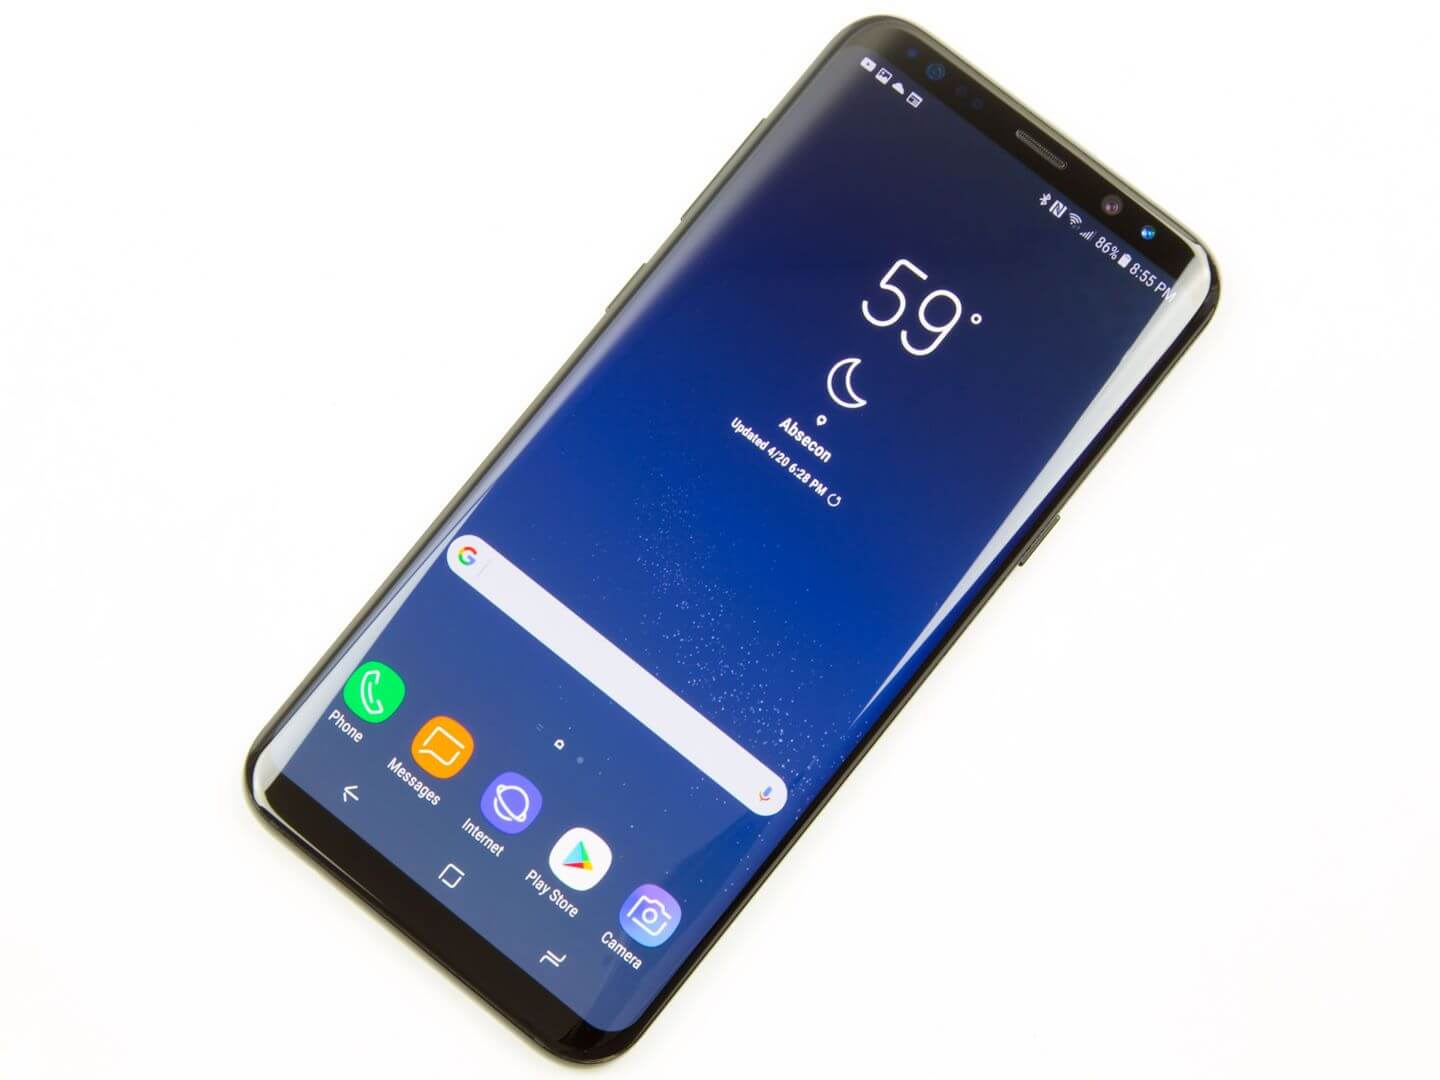 Samsung Galaxy S8 - An Overview | Daves Computer Tips